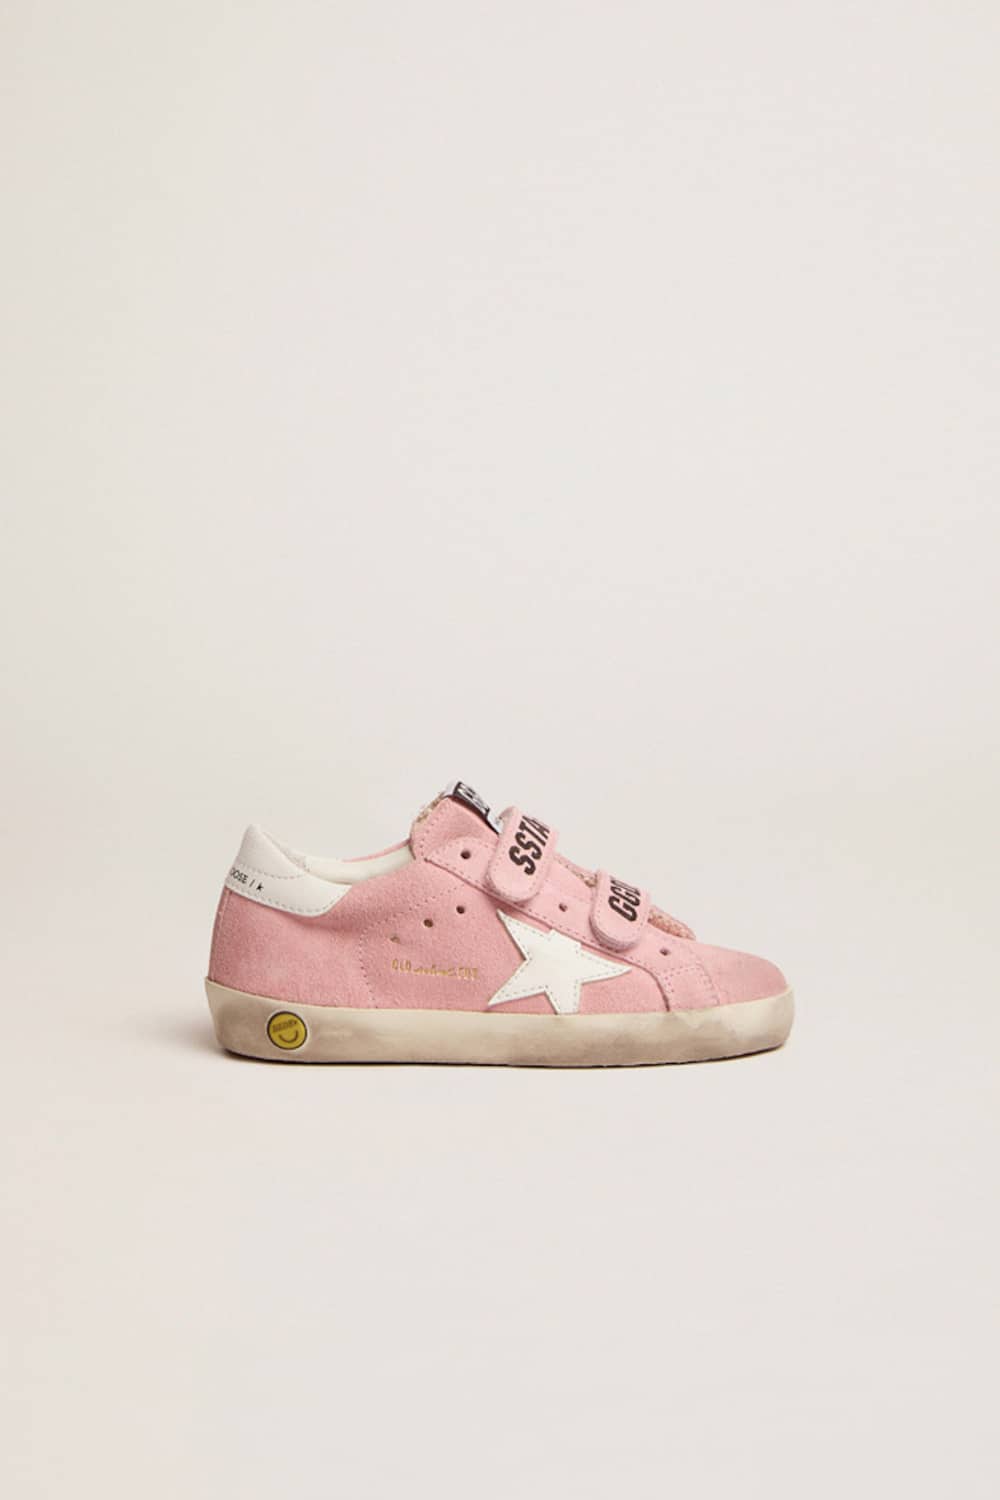 Golden Goose - Young Old School in pink suede with leather star and heel tab in 